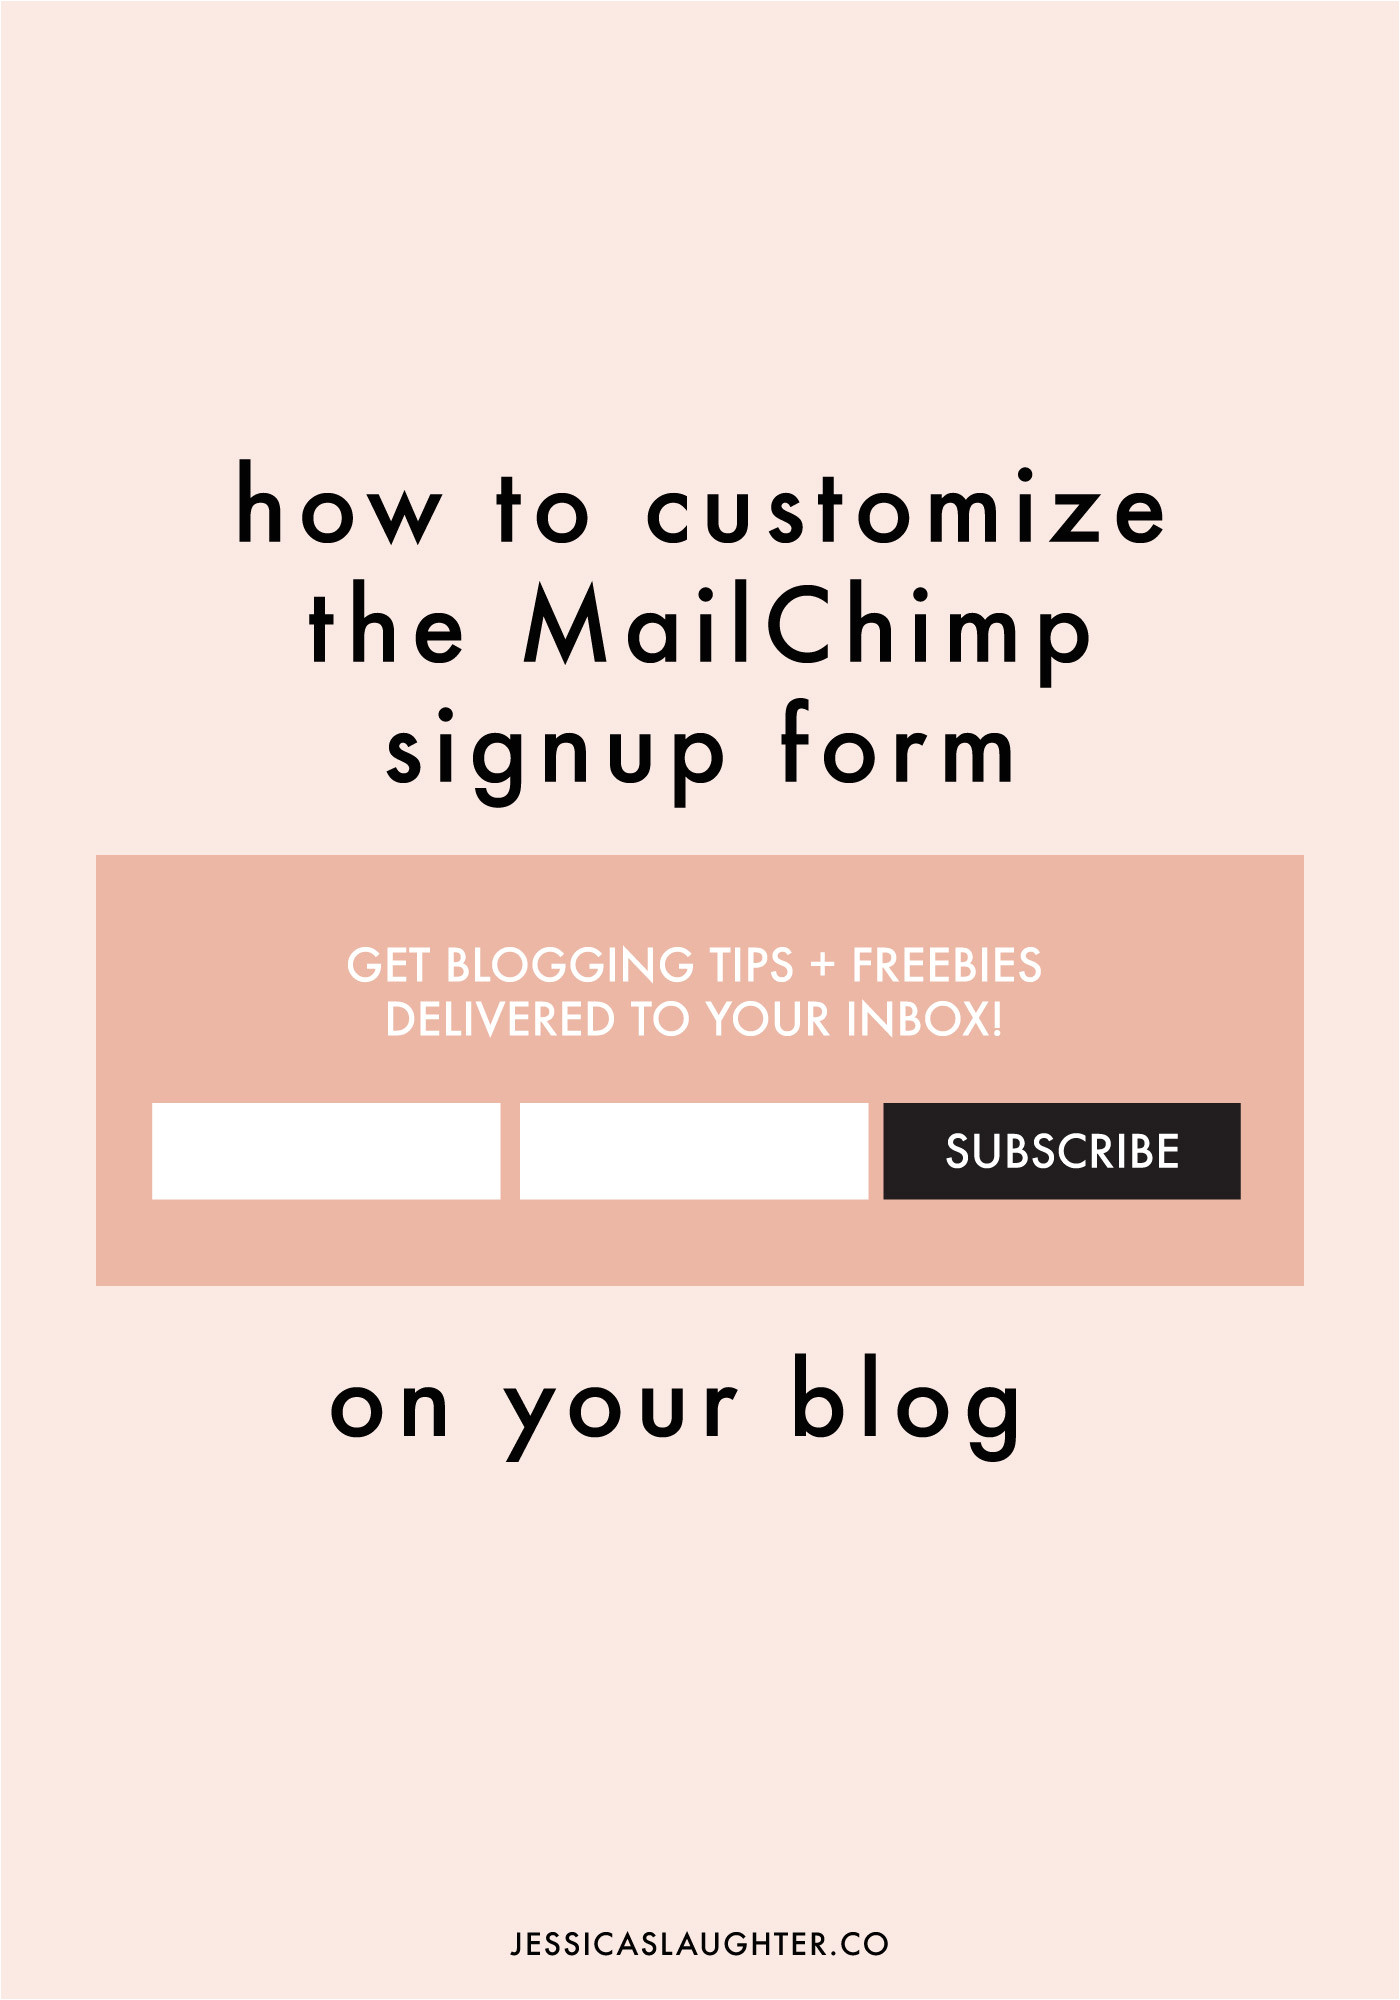 how to customize the mailchimp signup form on your blog